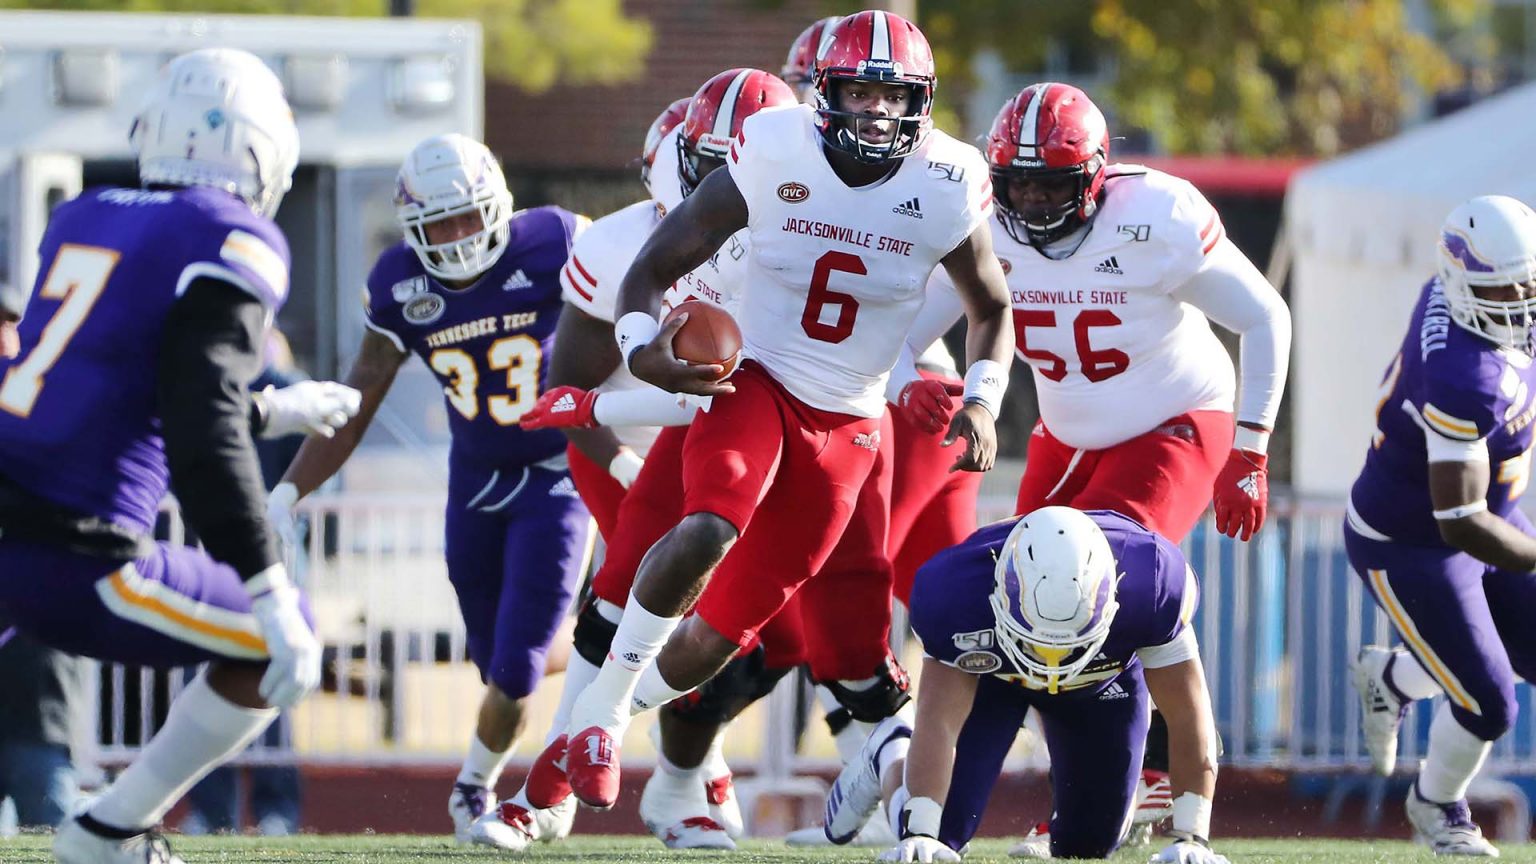 2021 Fcs Season Preview Jacksonville State The College Sports Journal 2055